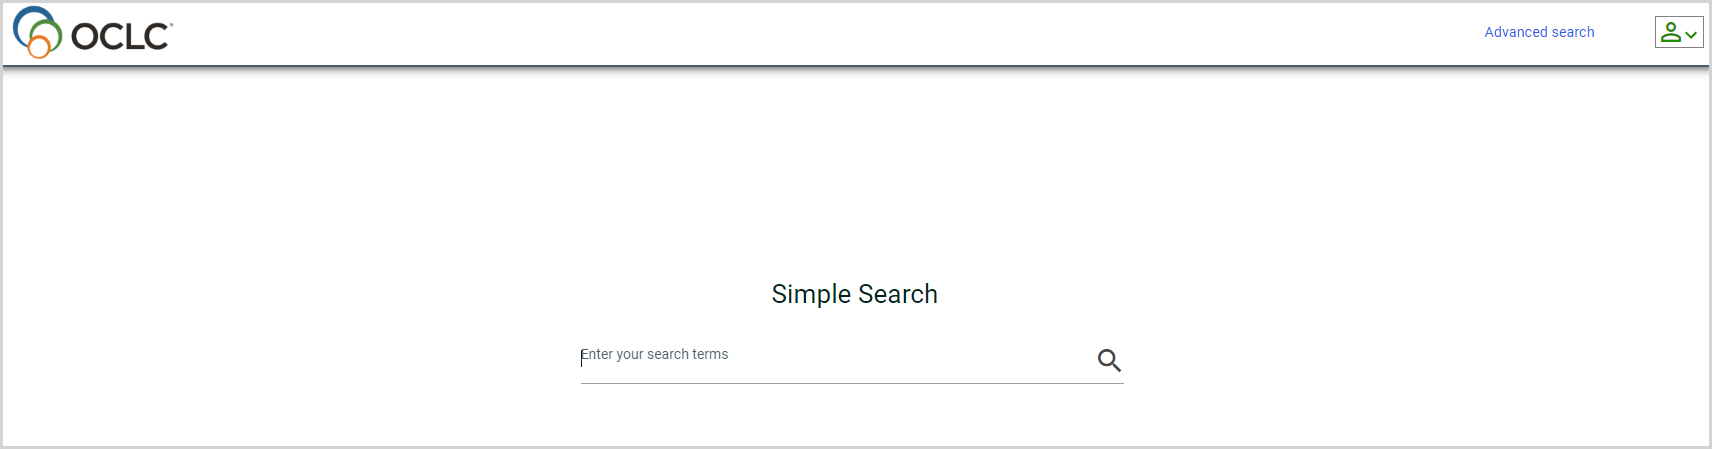 relais_simple_search.png